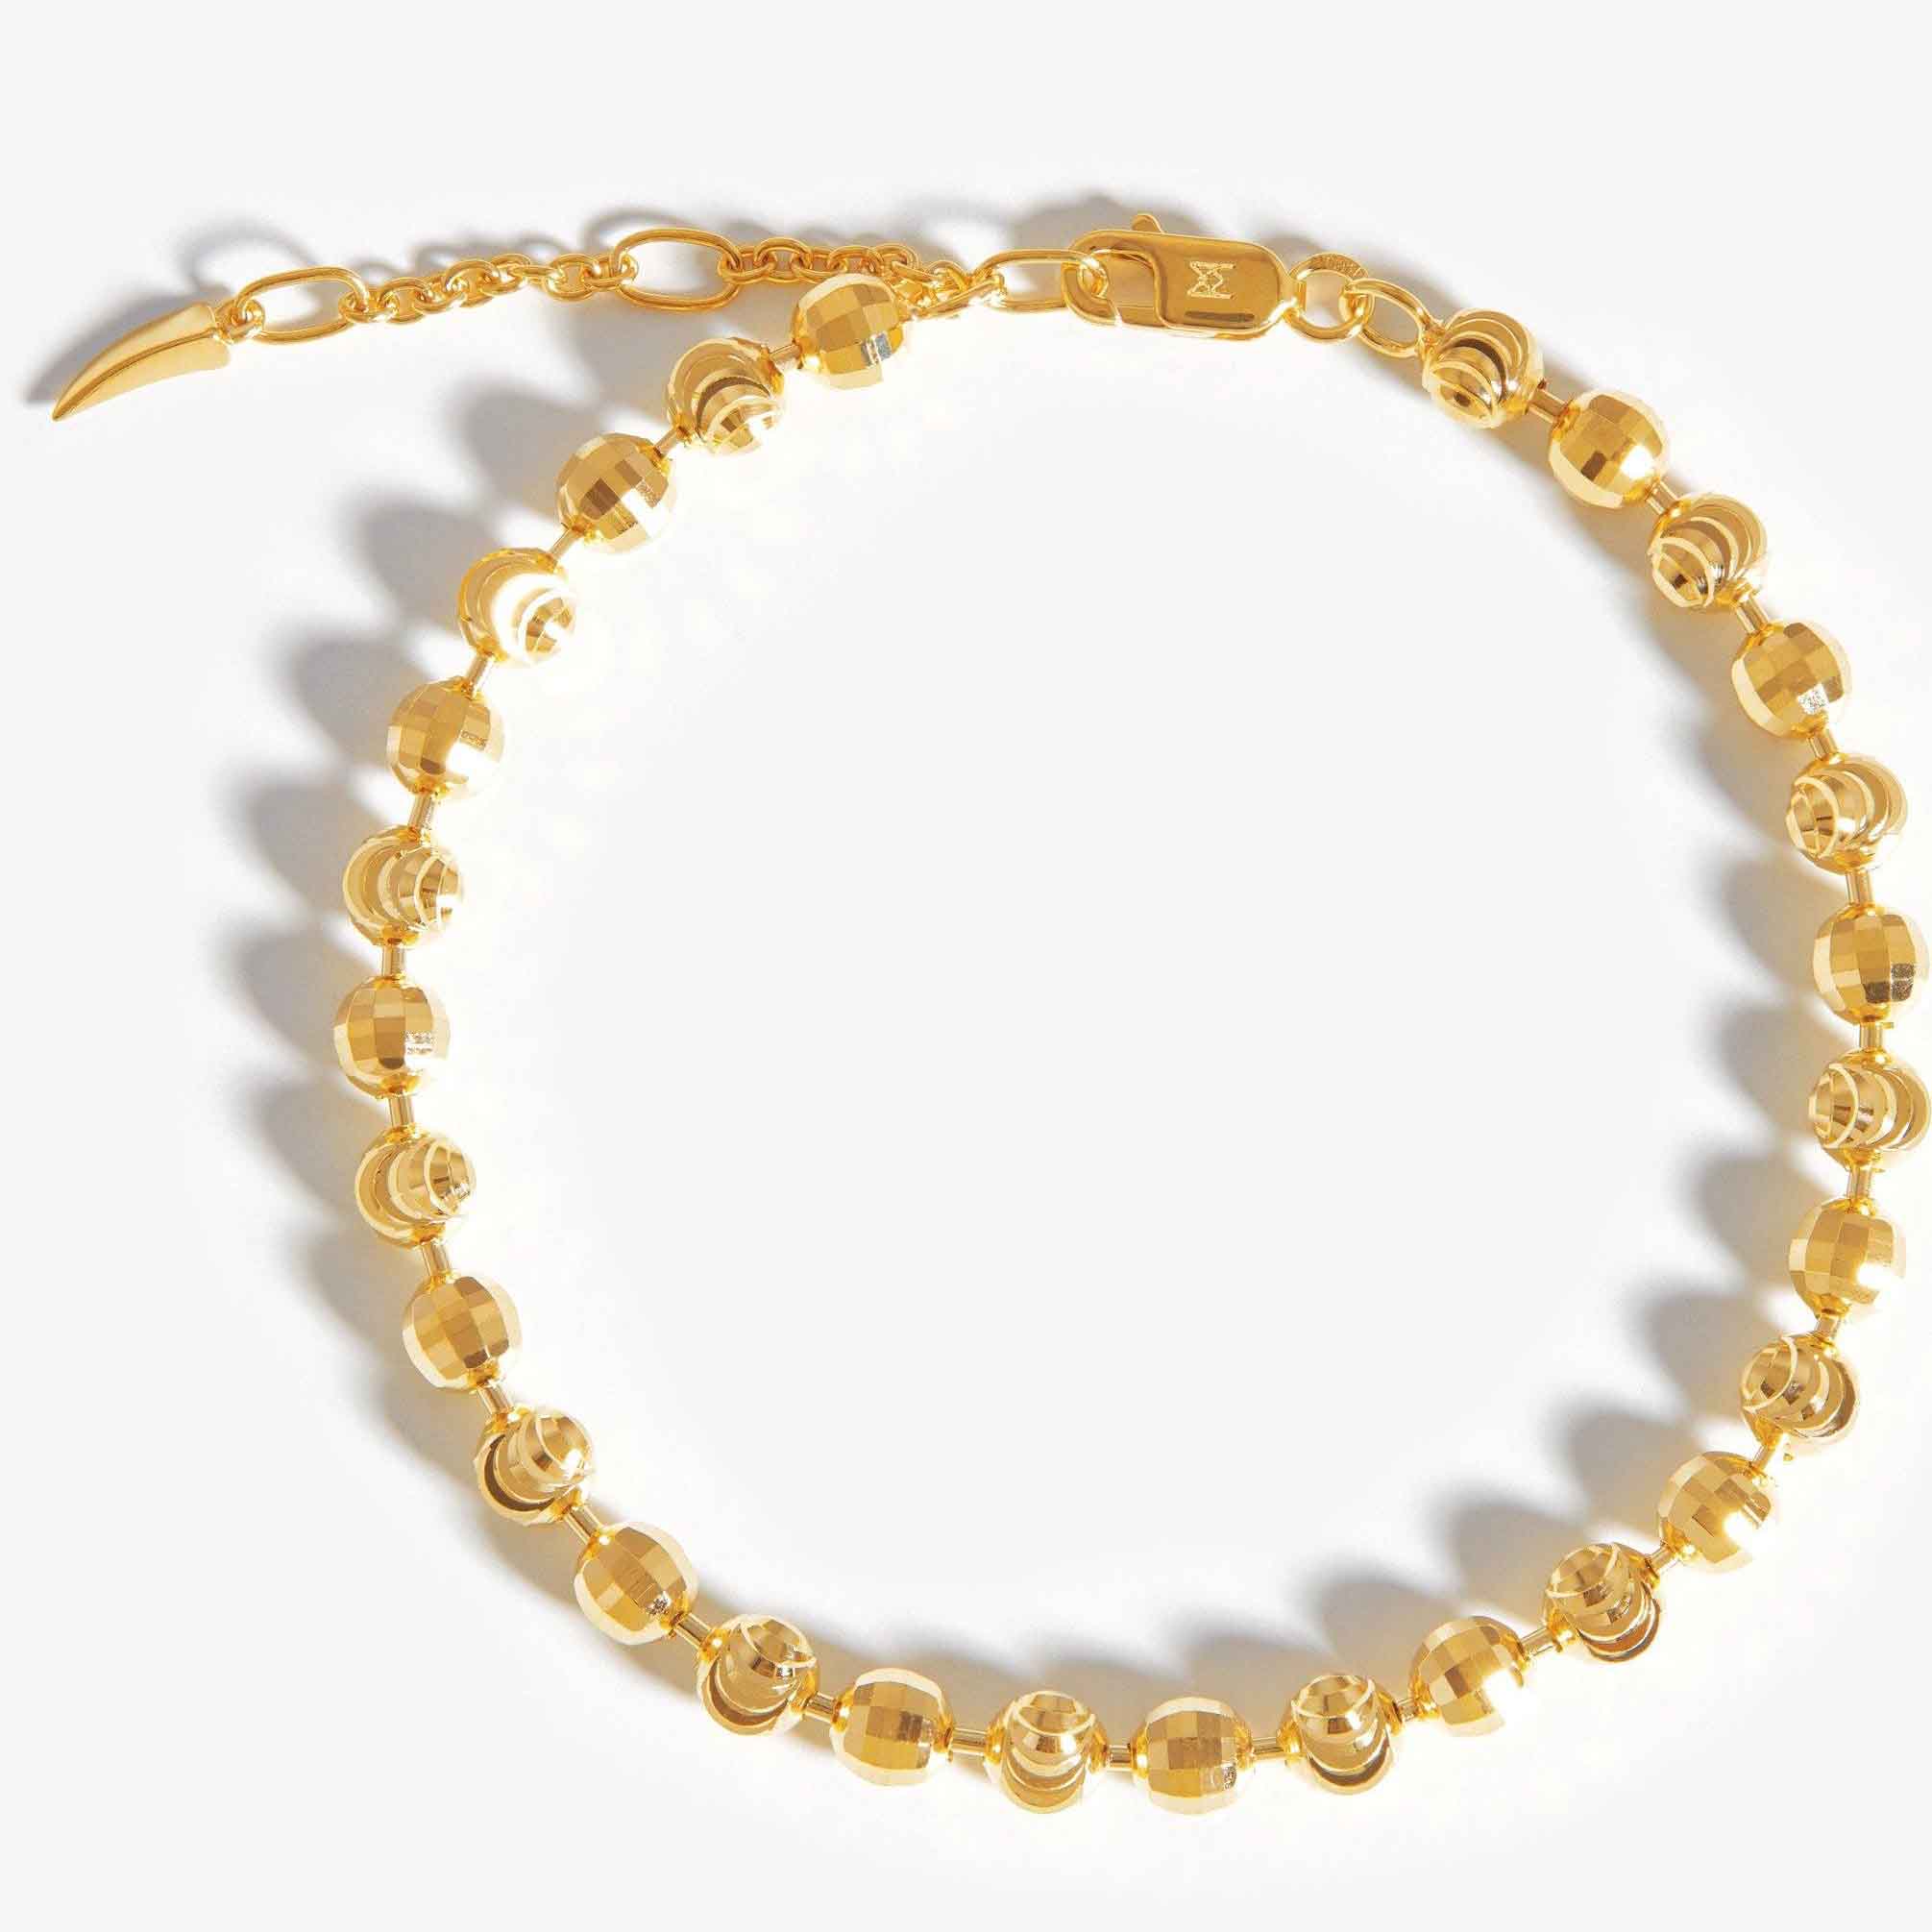 Cusotm wholesale silver bracelet vermeil 18k gold which has passed Quality Certification